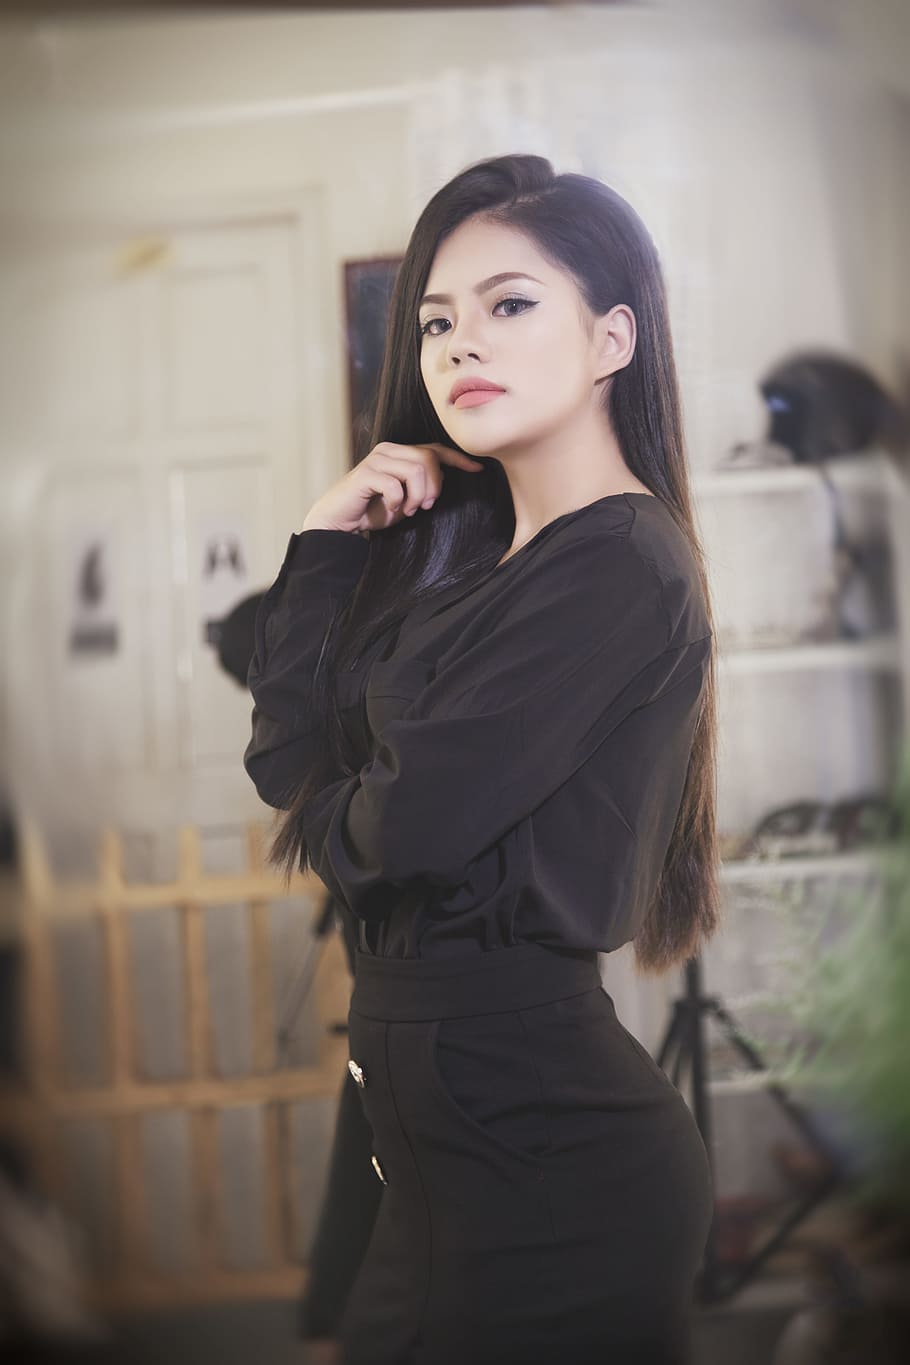 woman, standing, cabinet, beauty, asian, vietnam, nice, graceful, nice picture, girl